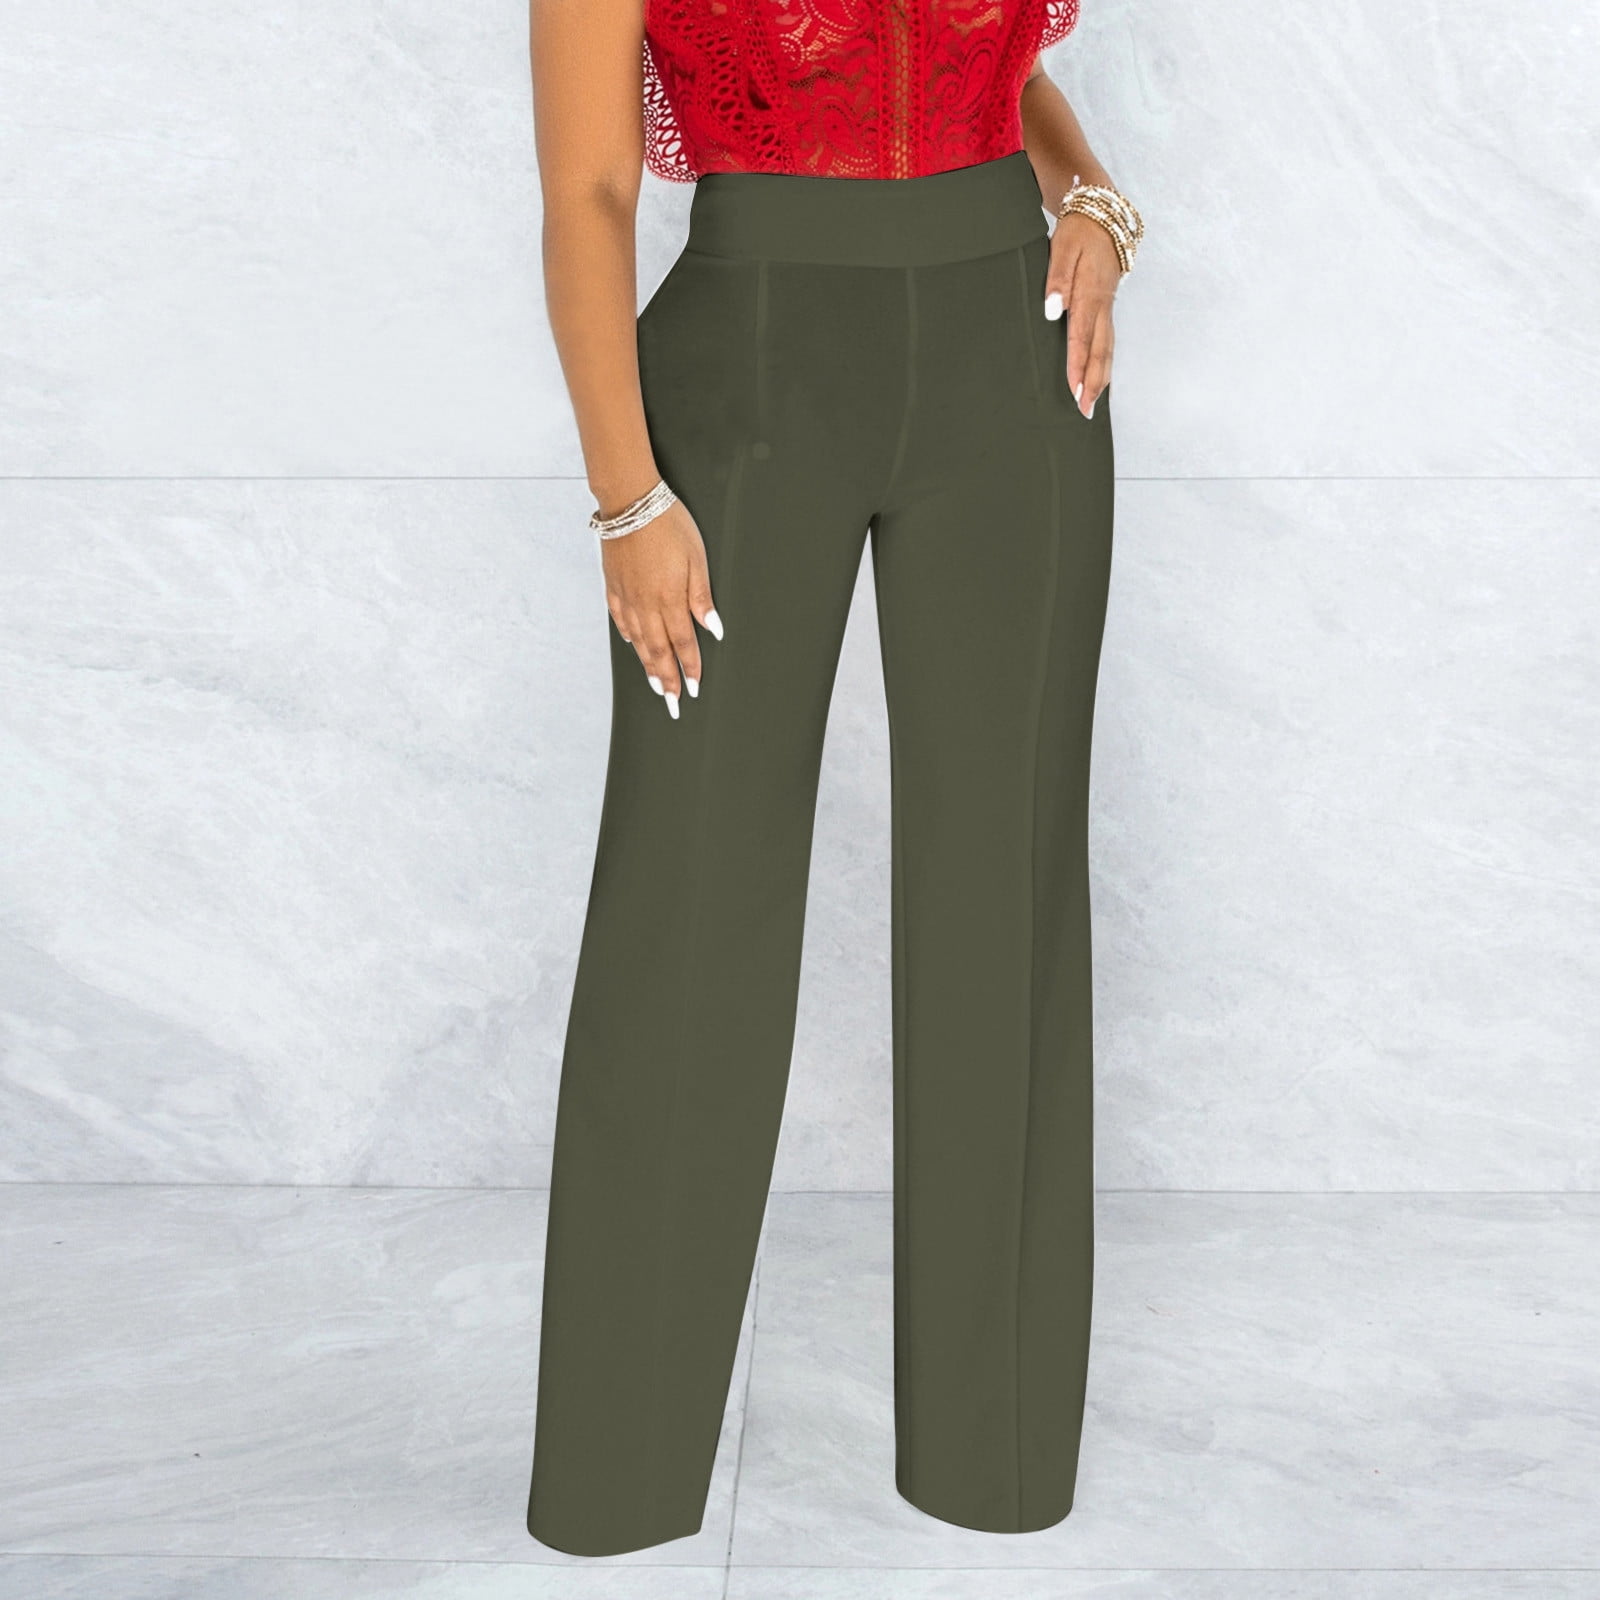 Buy Women White Regular Fit Solid Twill Parallel Trousers